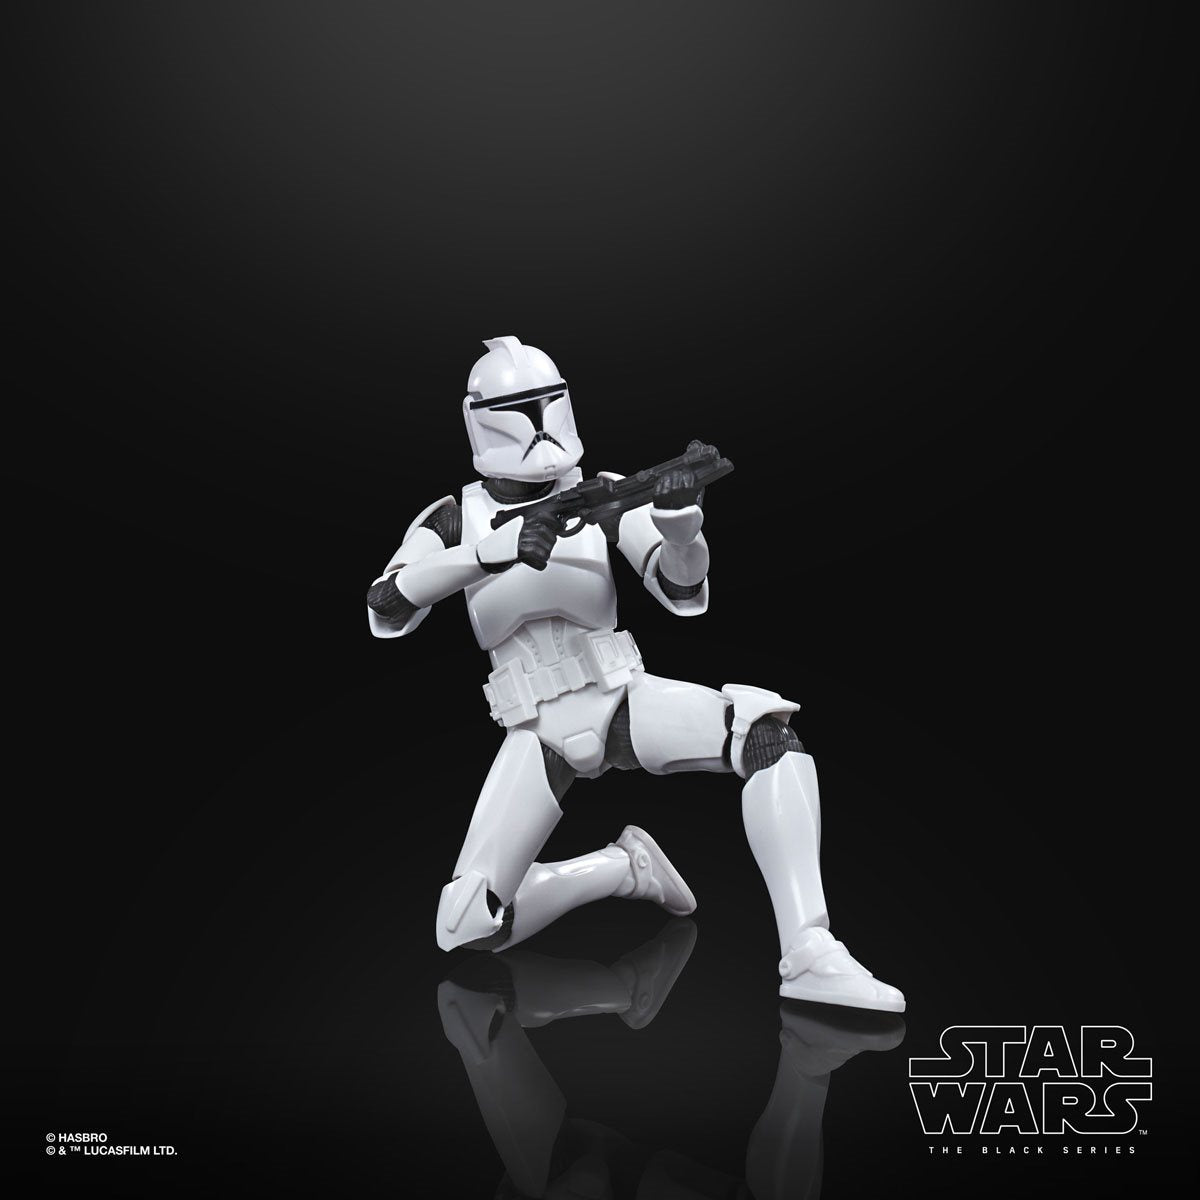 Hasbro Star Wars Black Series Attack of the Clones #02 Phase I Clone Trooper 6 Inch Action Figure